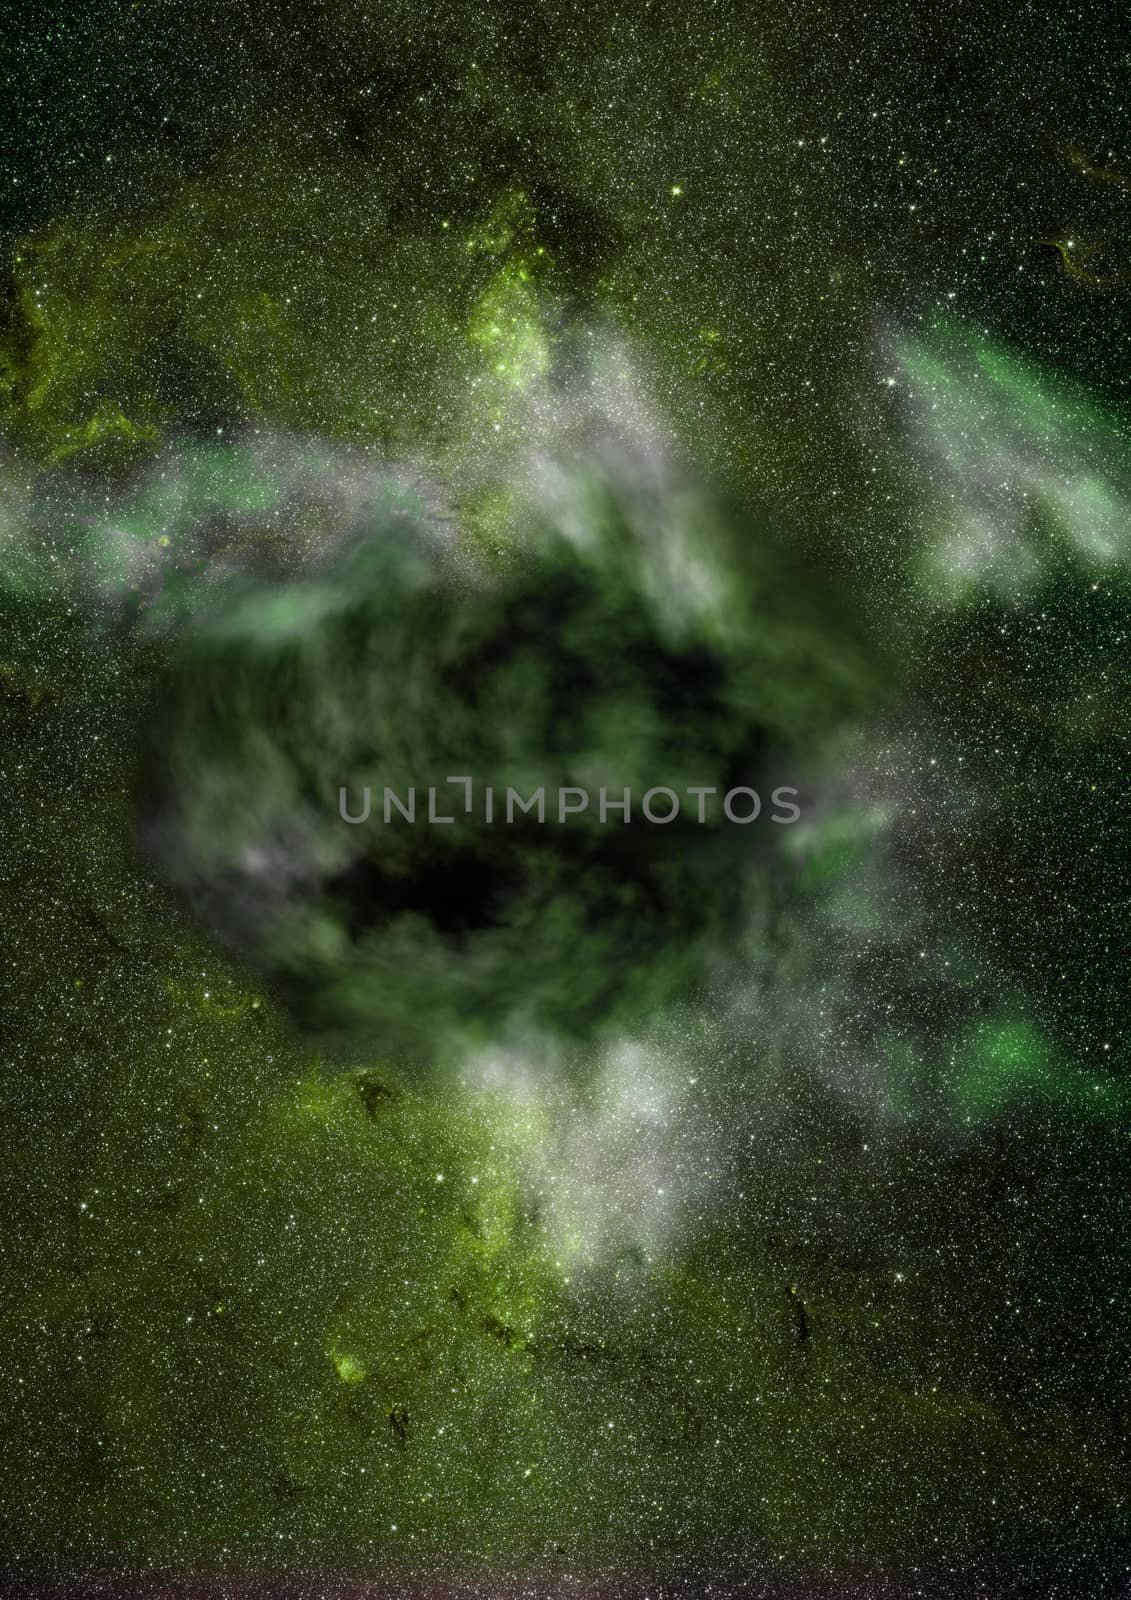 Star field in space a nebulae and a gas congestion. Elements of this image furnished by NASA.